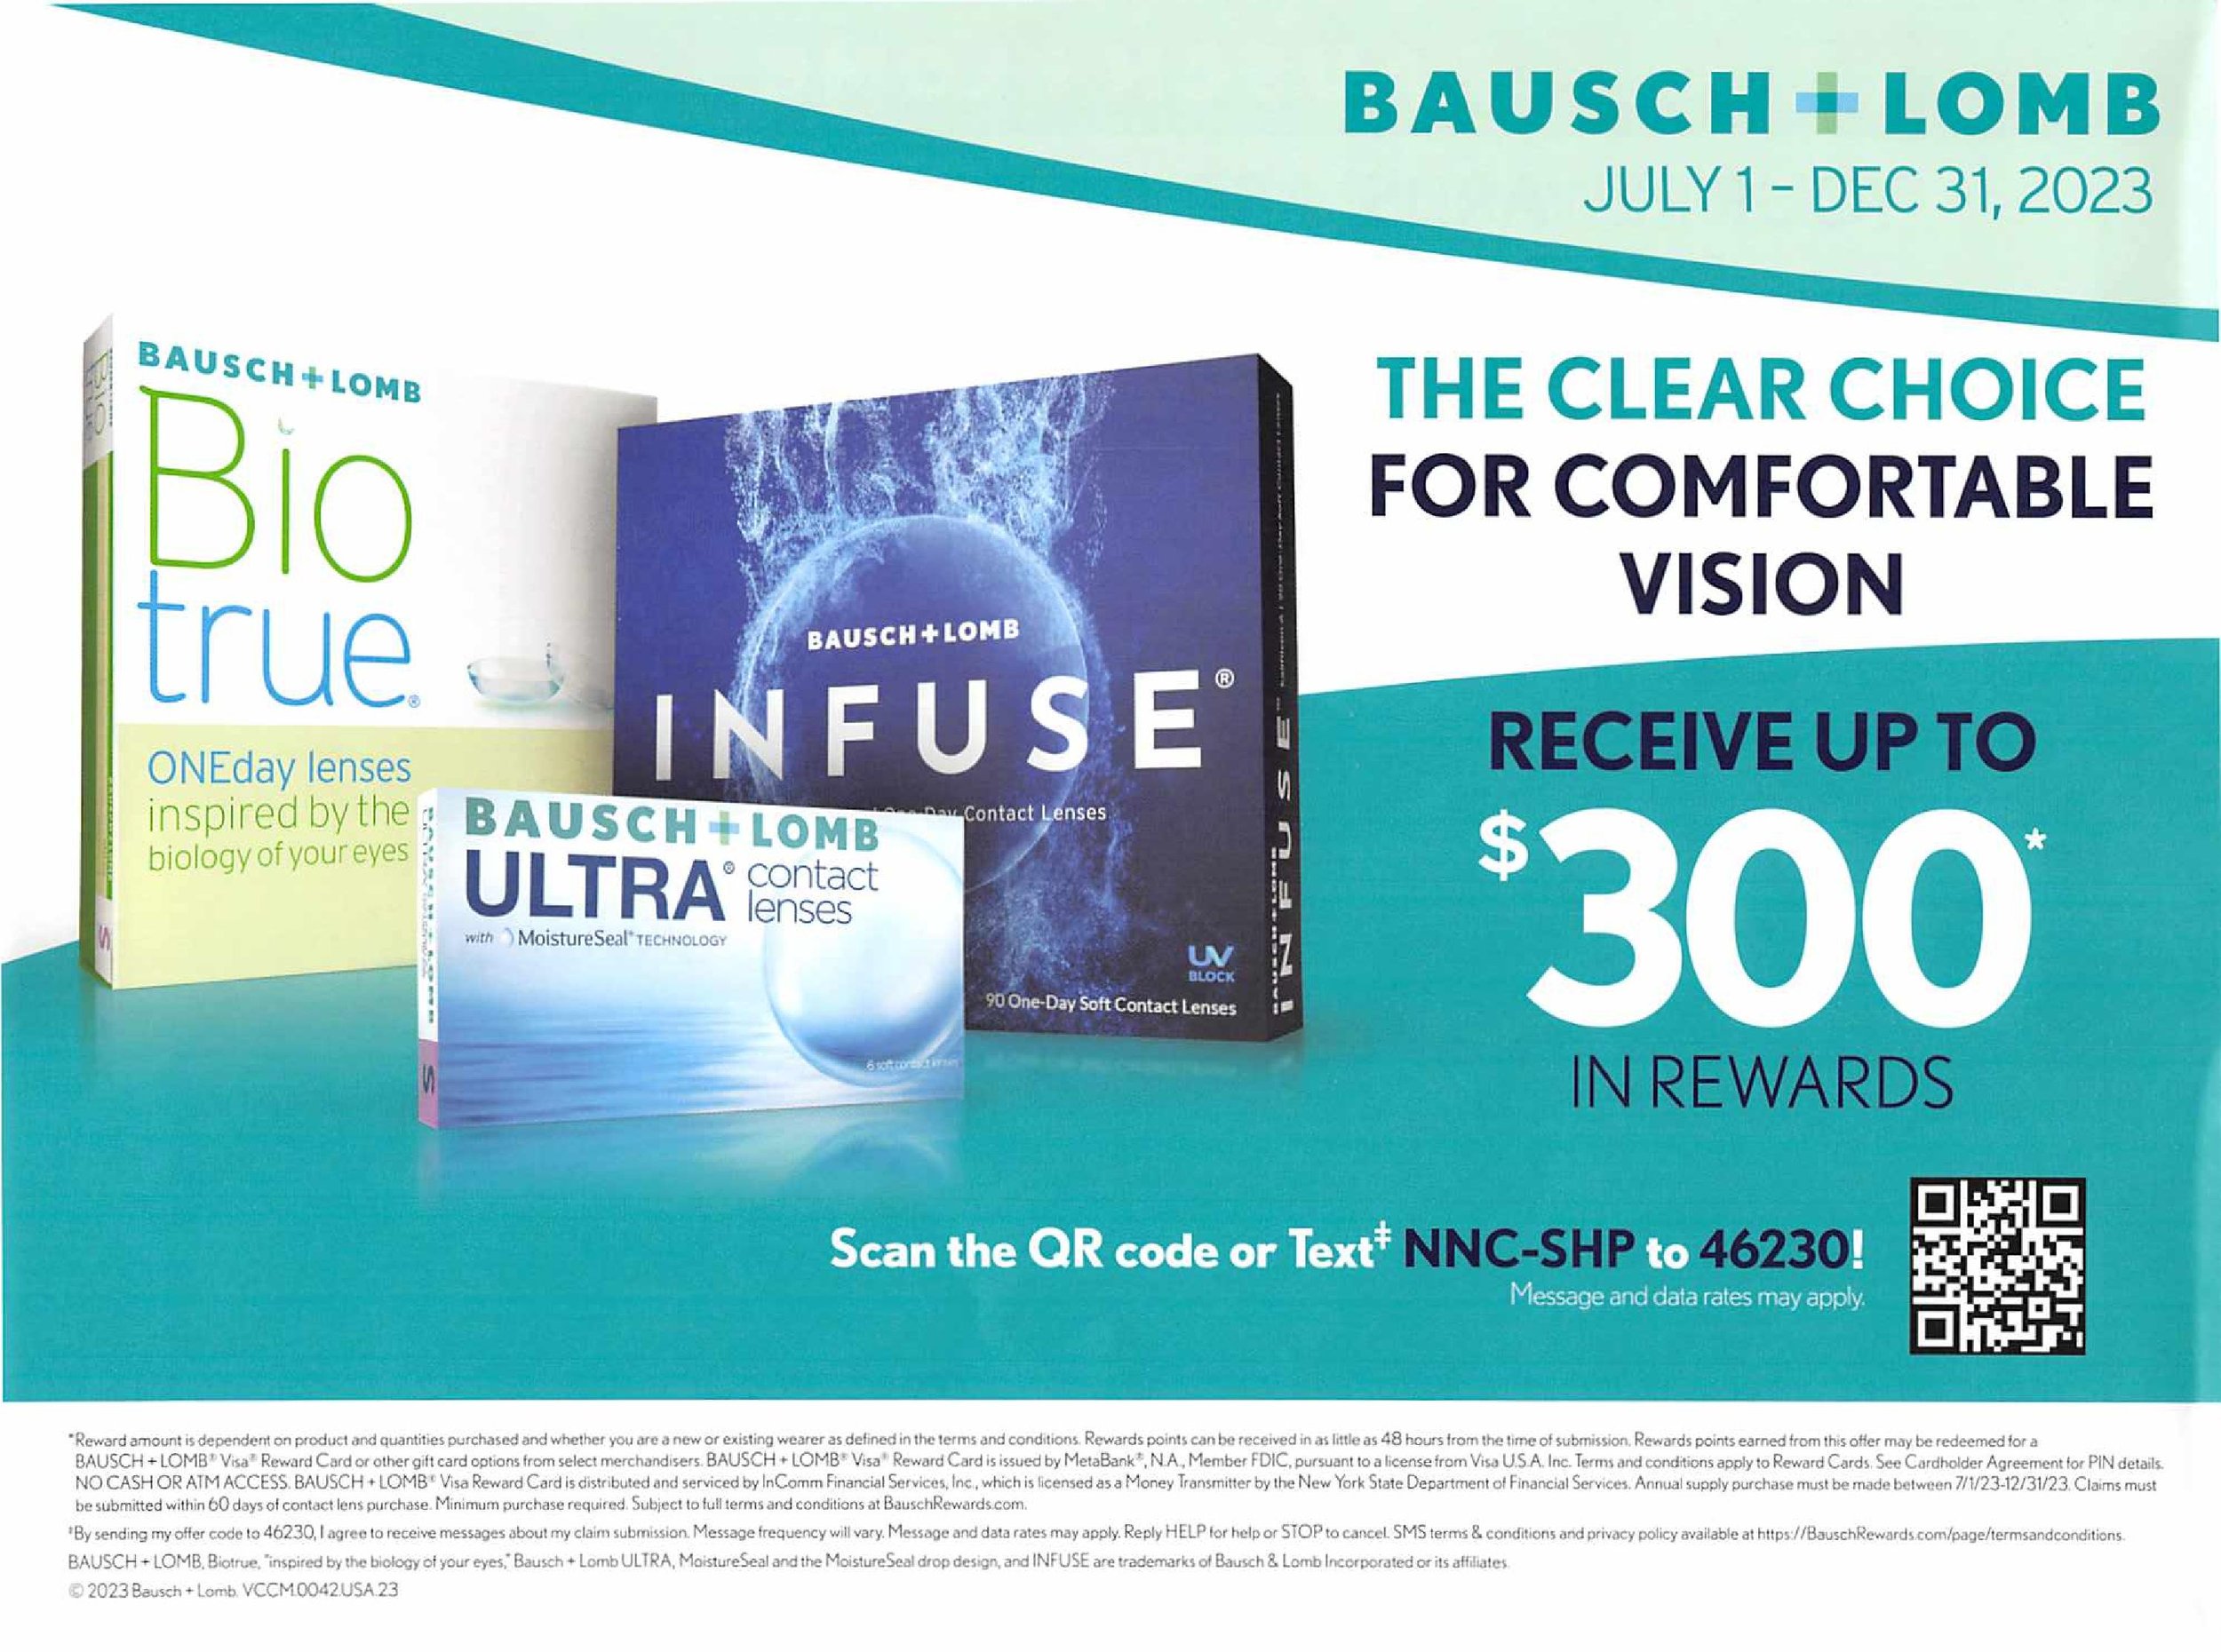 get-up-to-a-300-rebate-on-bausch-lomb-contact-lenses-sunshine